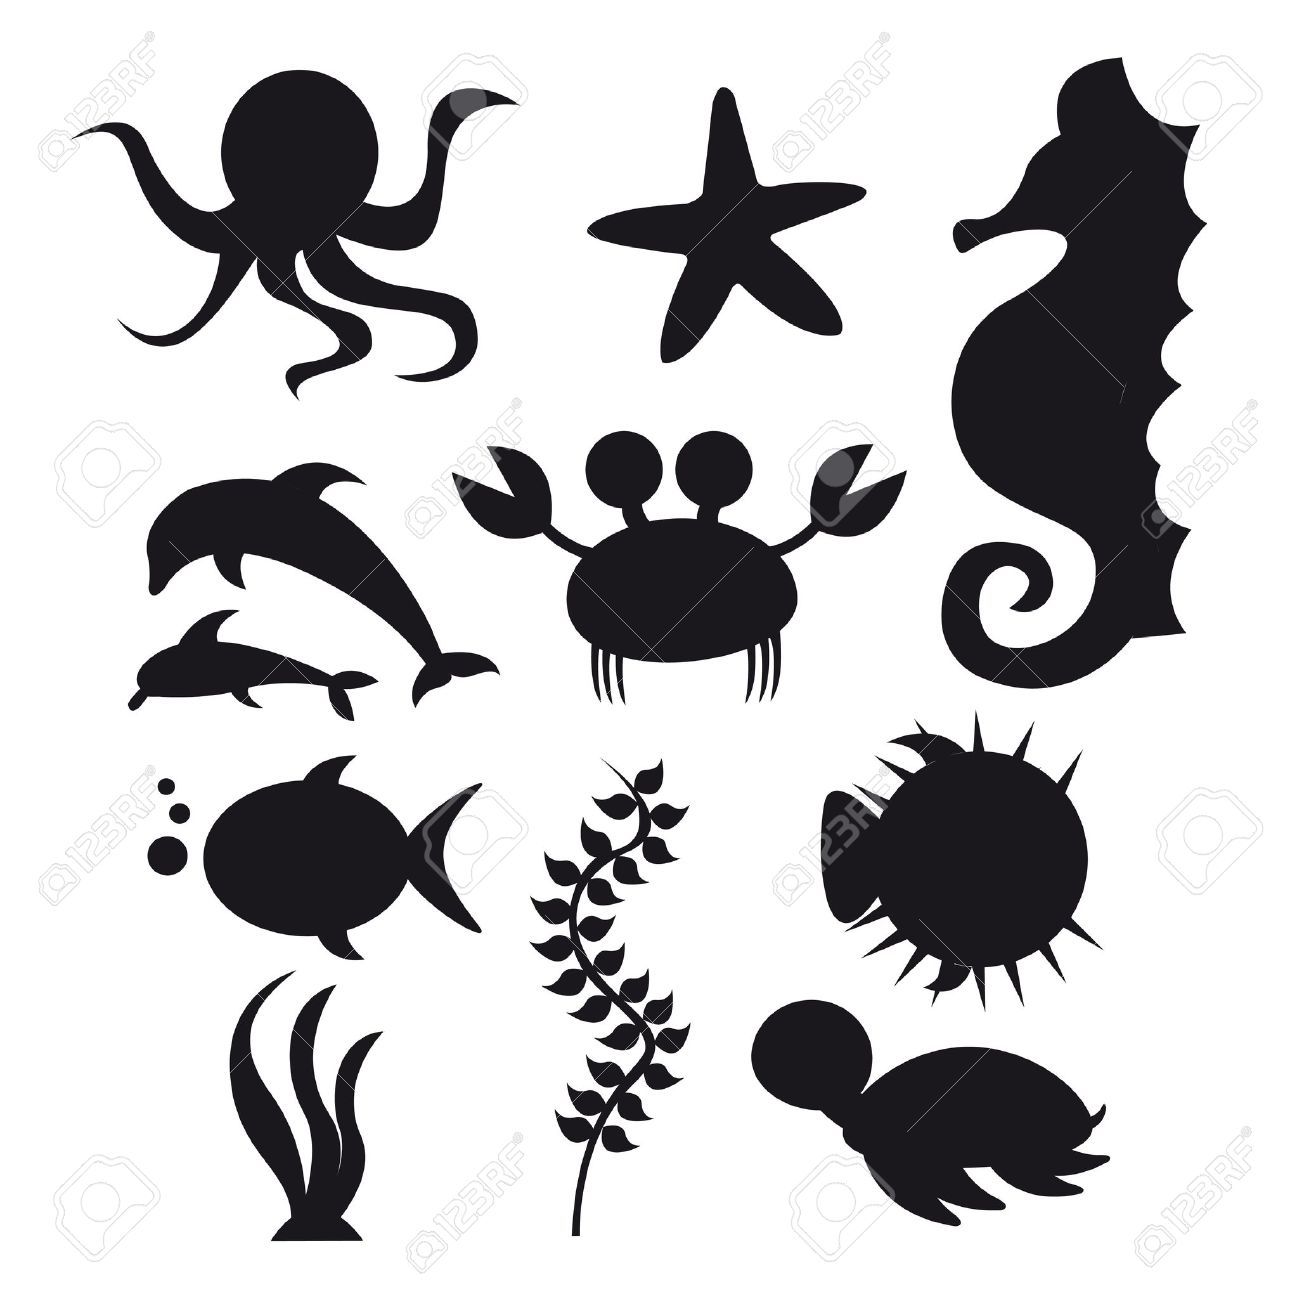 Under the sea silhouettes